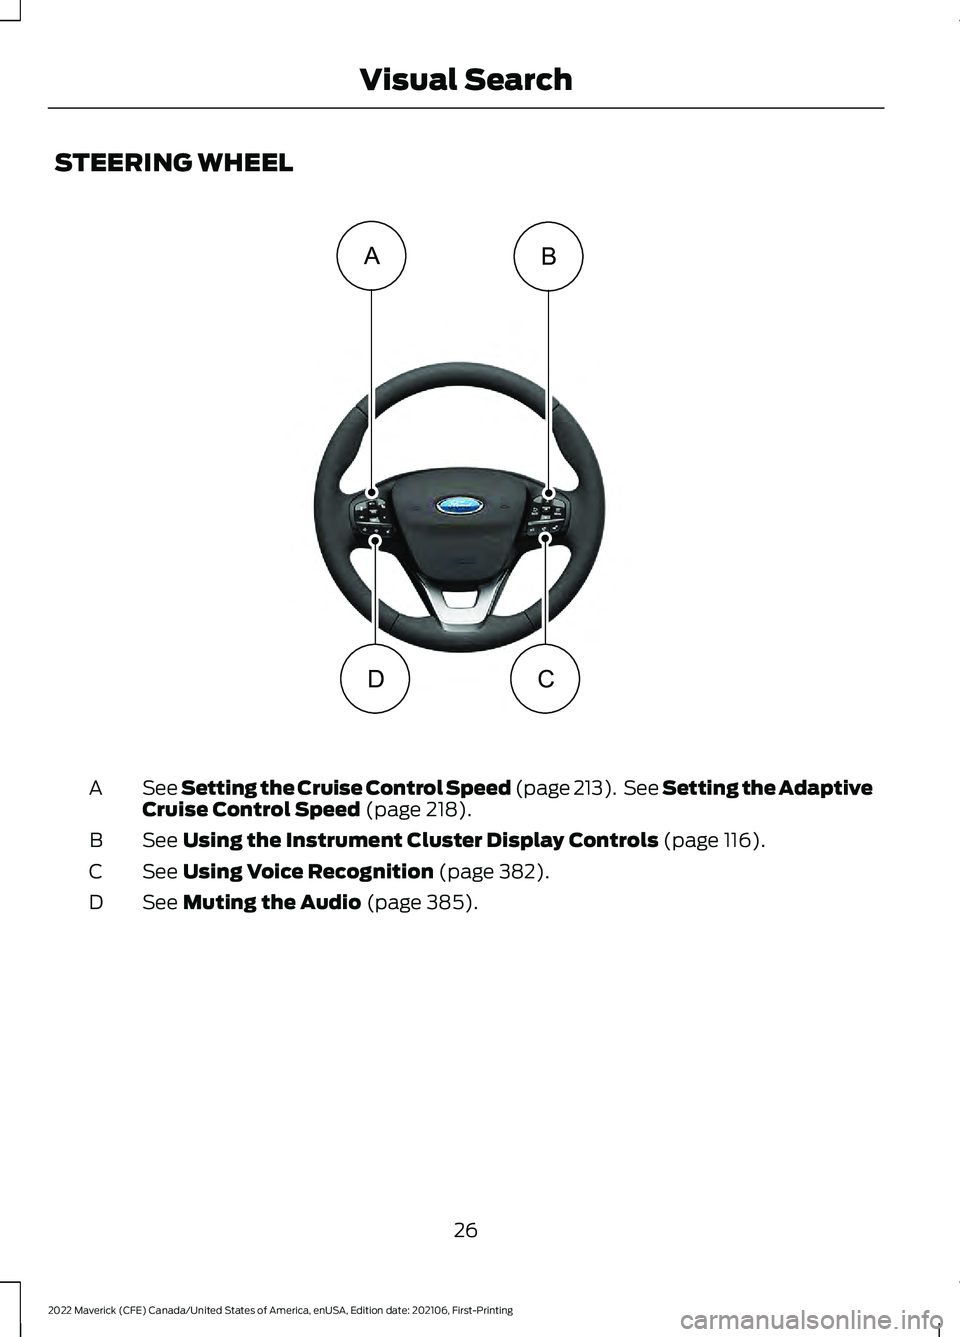 FORD MAVERICK 2022 Owners Manual STEERING WHEEL
See Setting the Cruise Control Speed (page 213).  See Setting the Adaptive
C
ruise Control Speed (page 218).
A
See 
Using the Instrument Cluster Display Controls (page 116).
B
See 
Usin